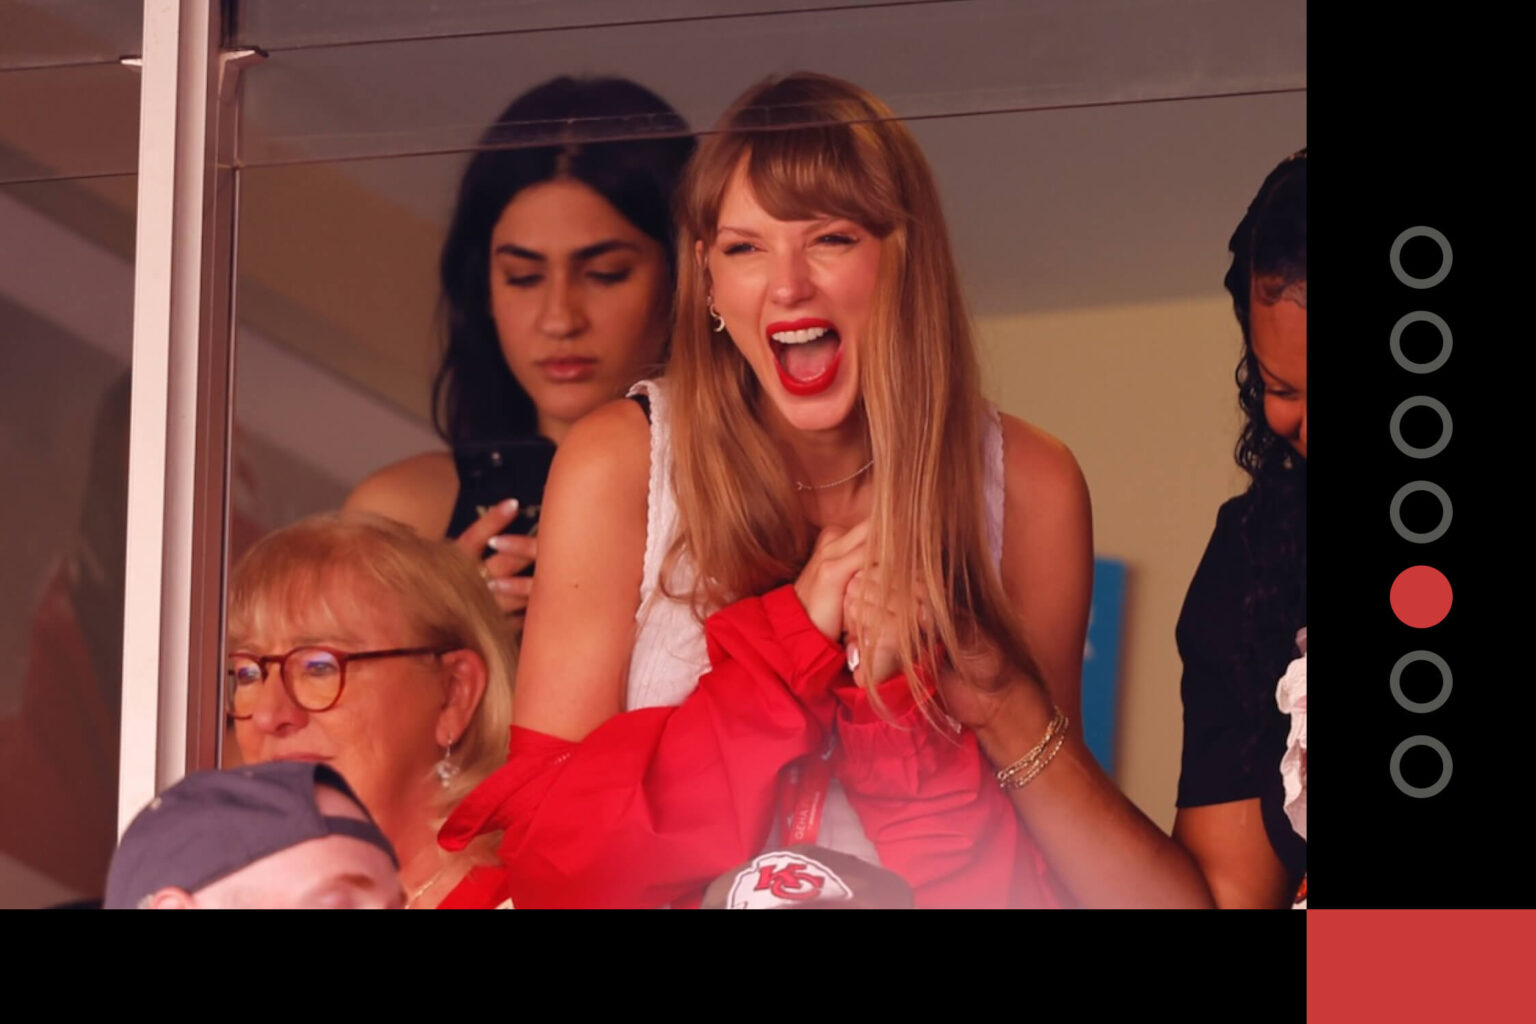 When Taylor Swift shows up for an NFL game, what’s a TV broadcast to do?